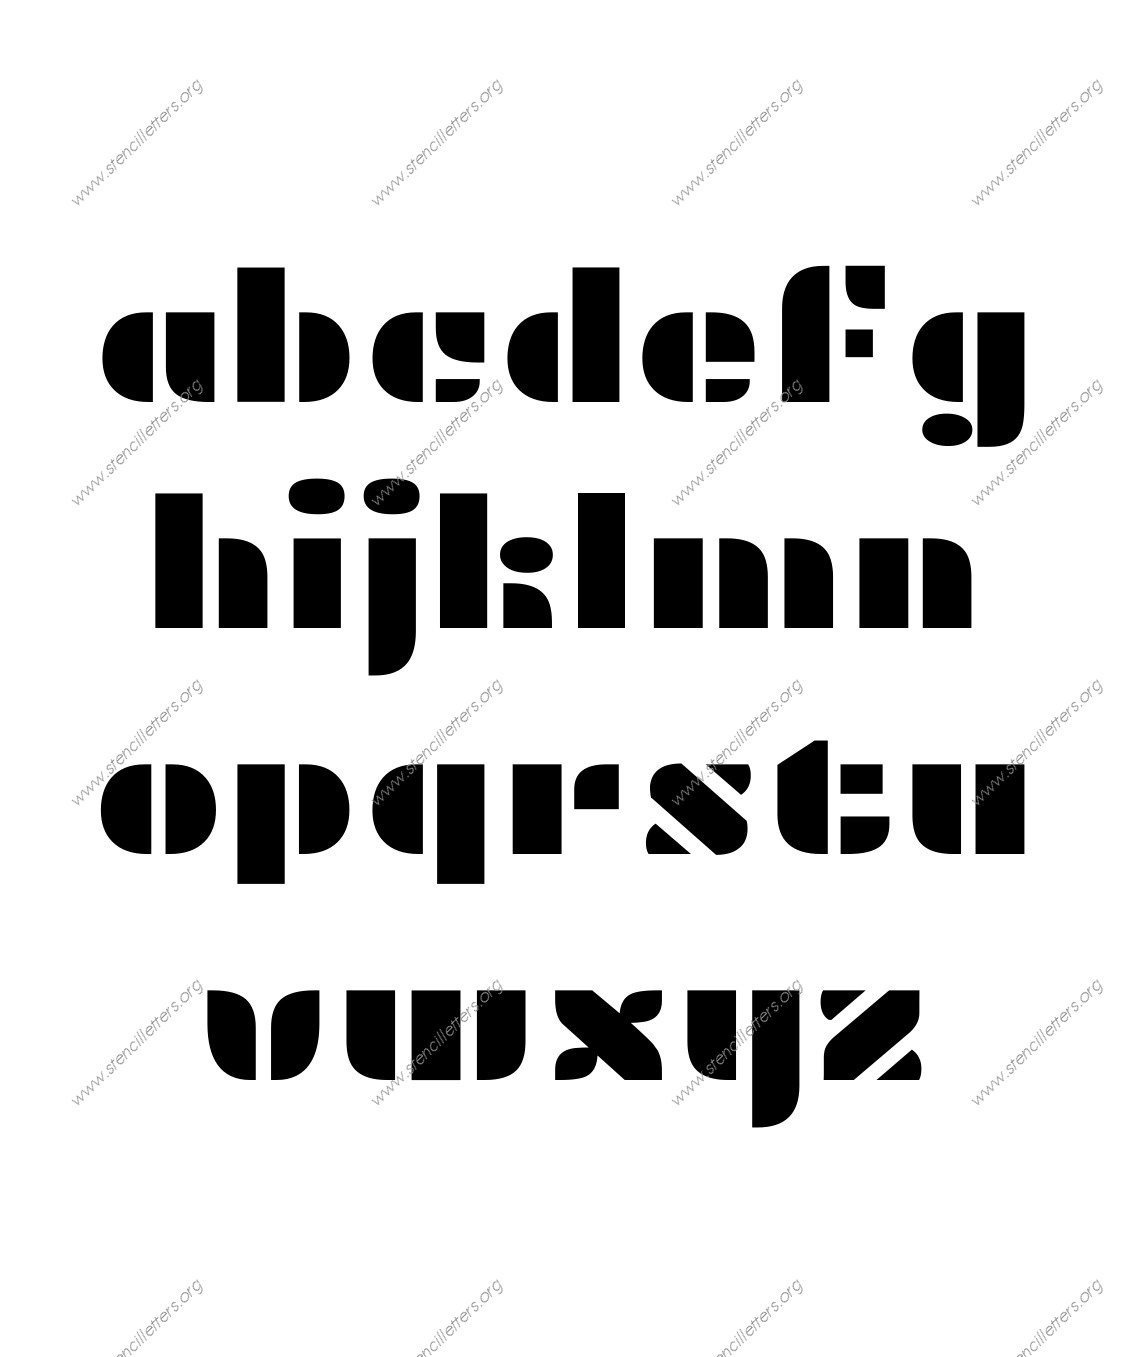 Display Decorative A to Z lowercase letter stencils